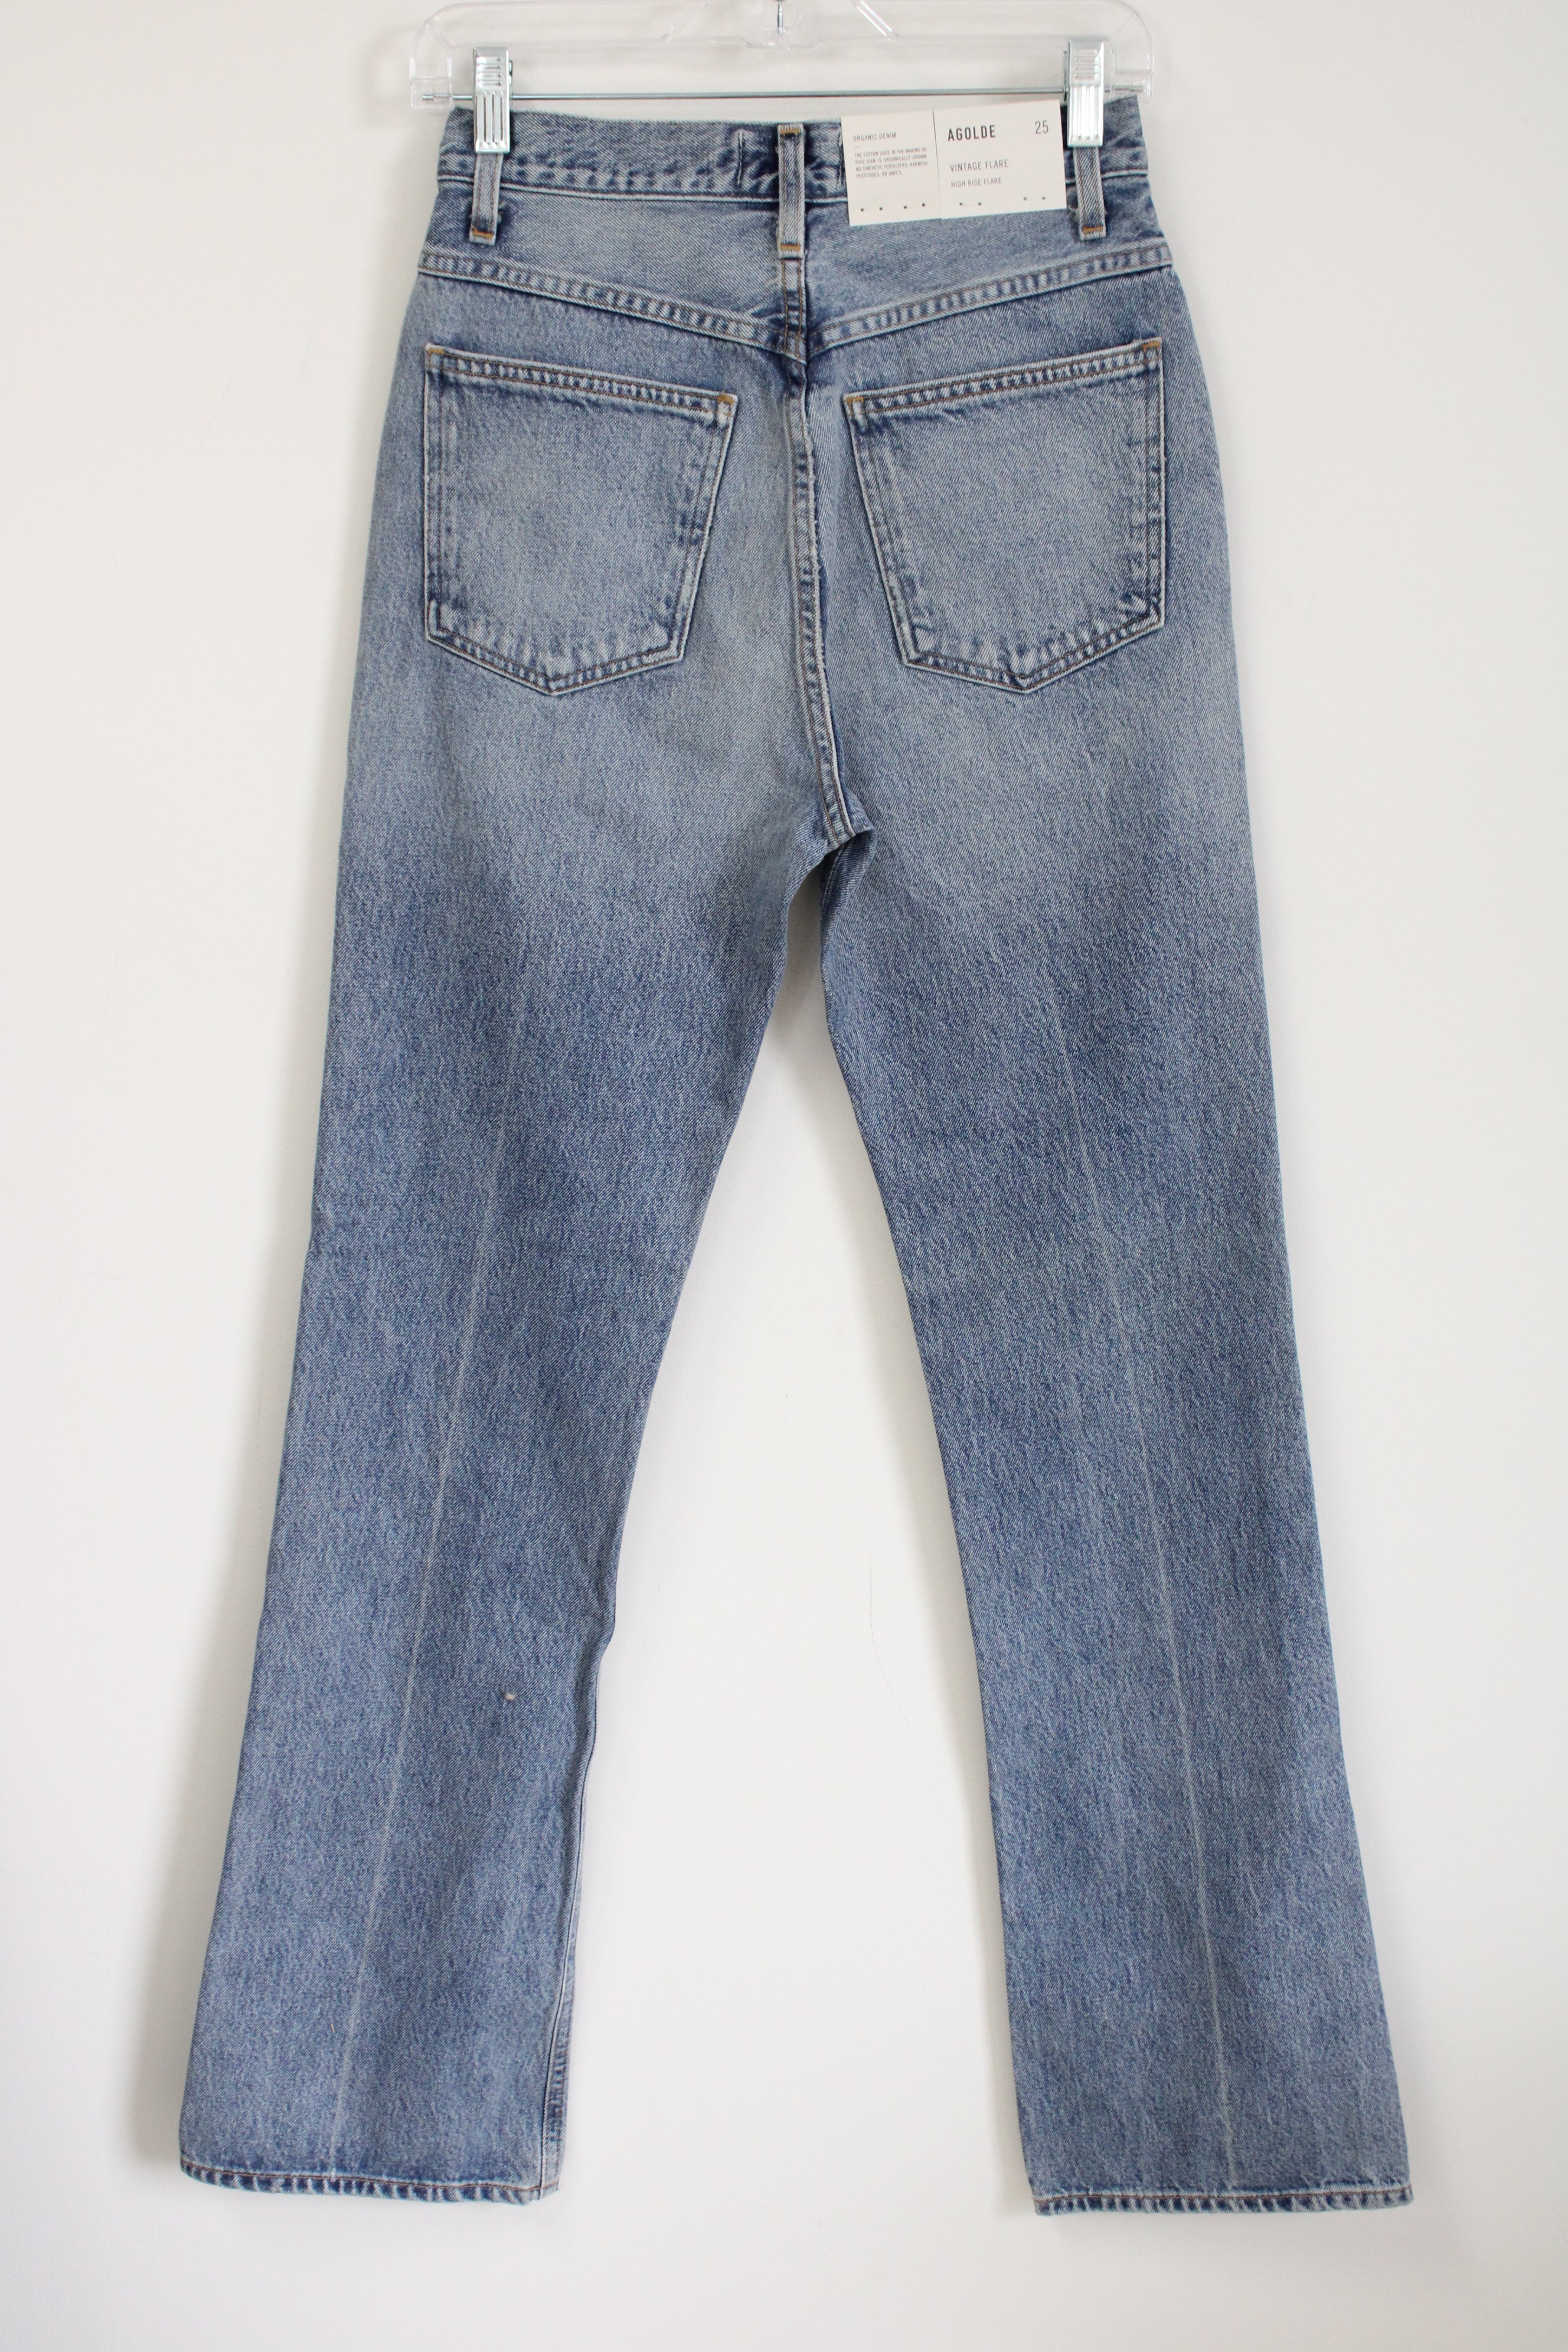 NEW Agolde Vintage High Rise Flare Clamor Jeans | 25